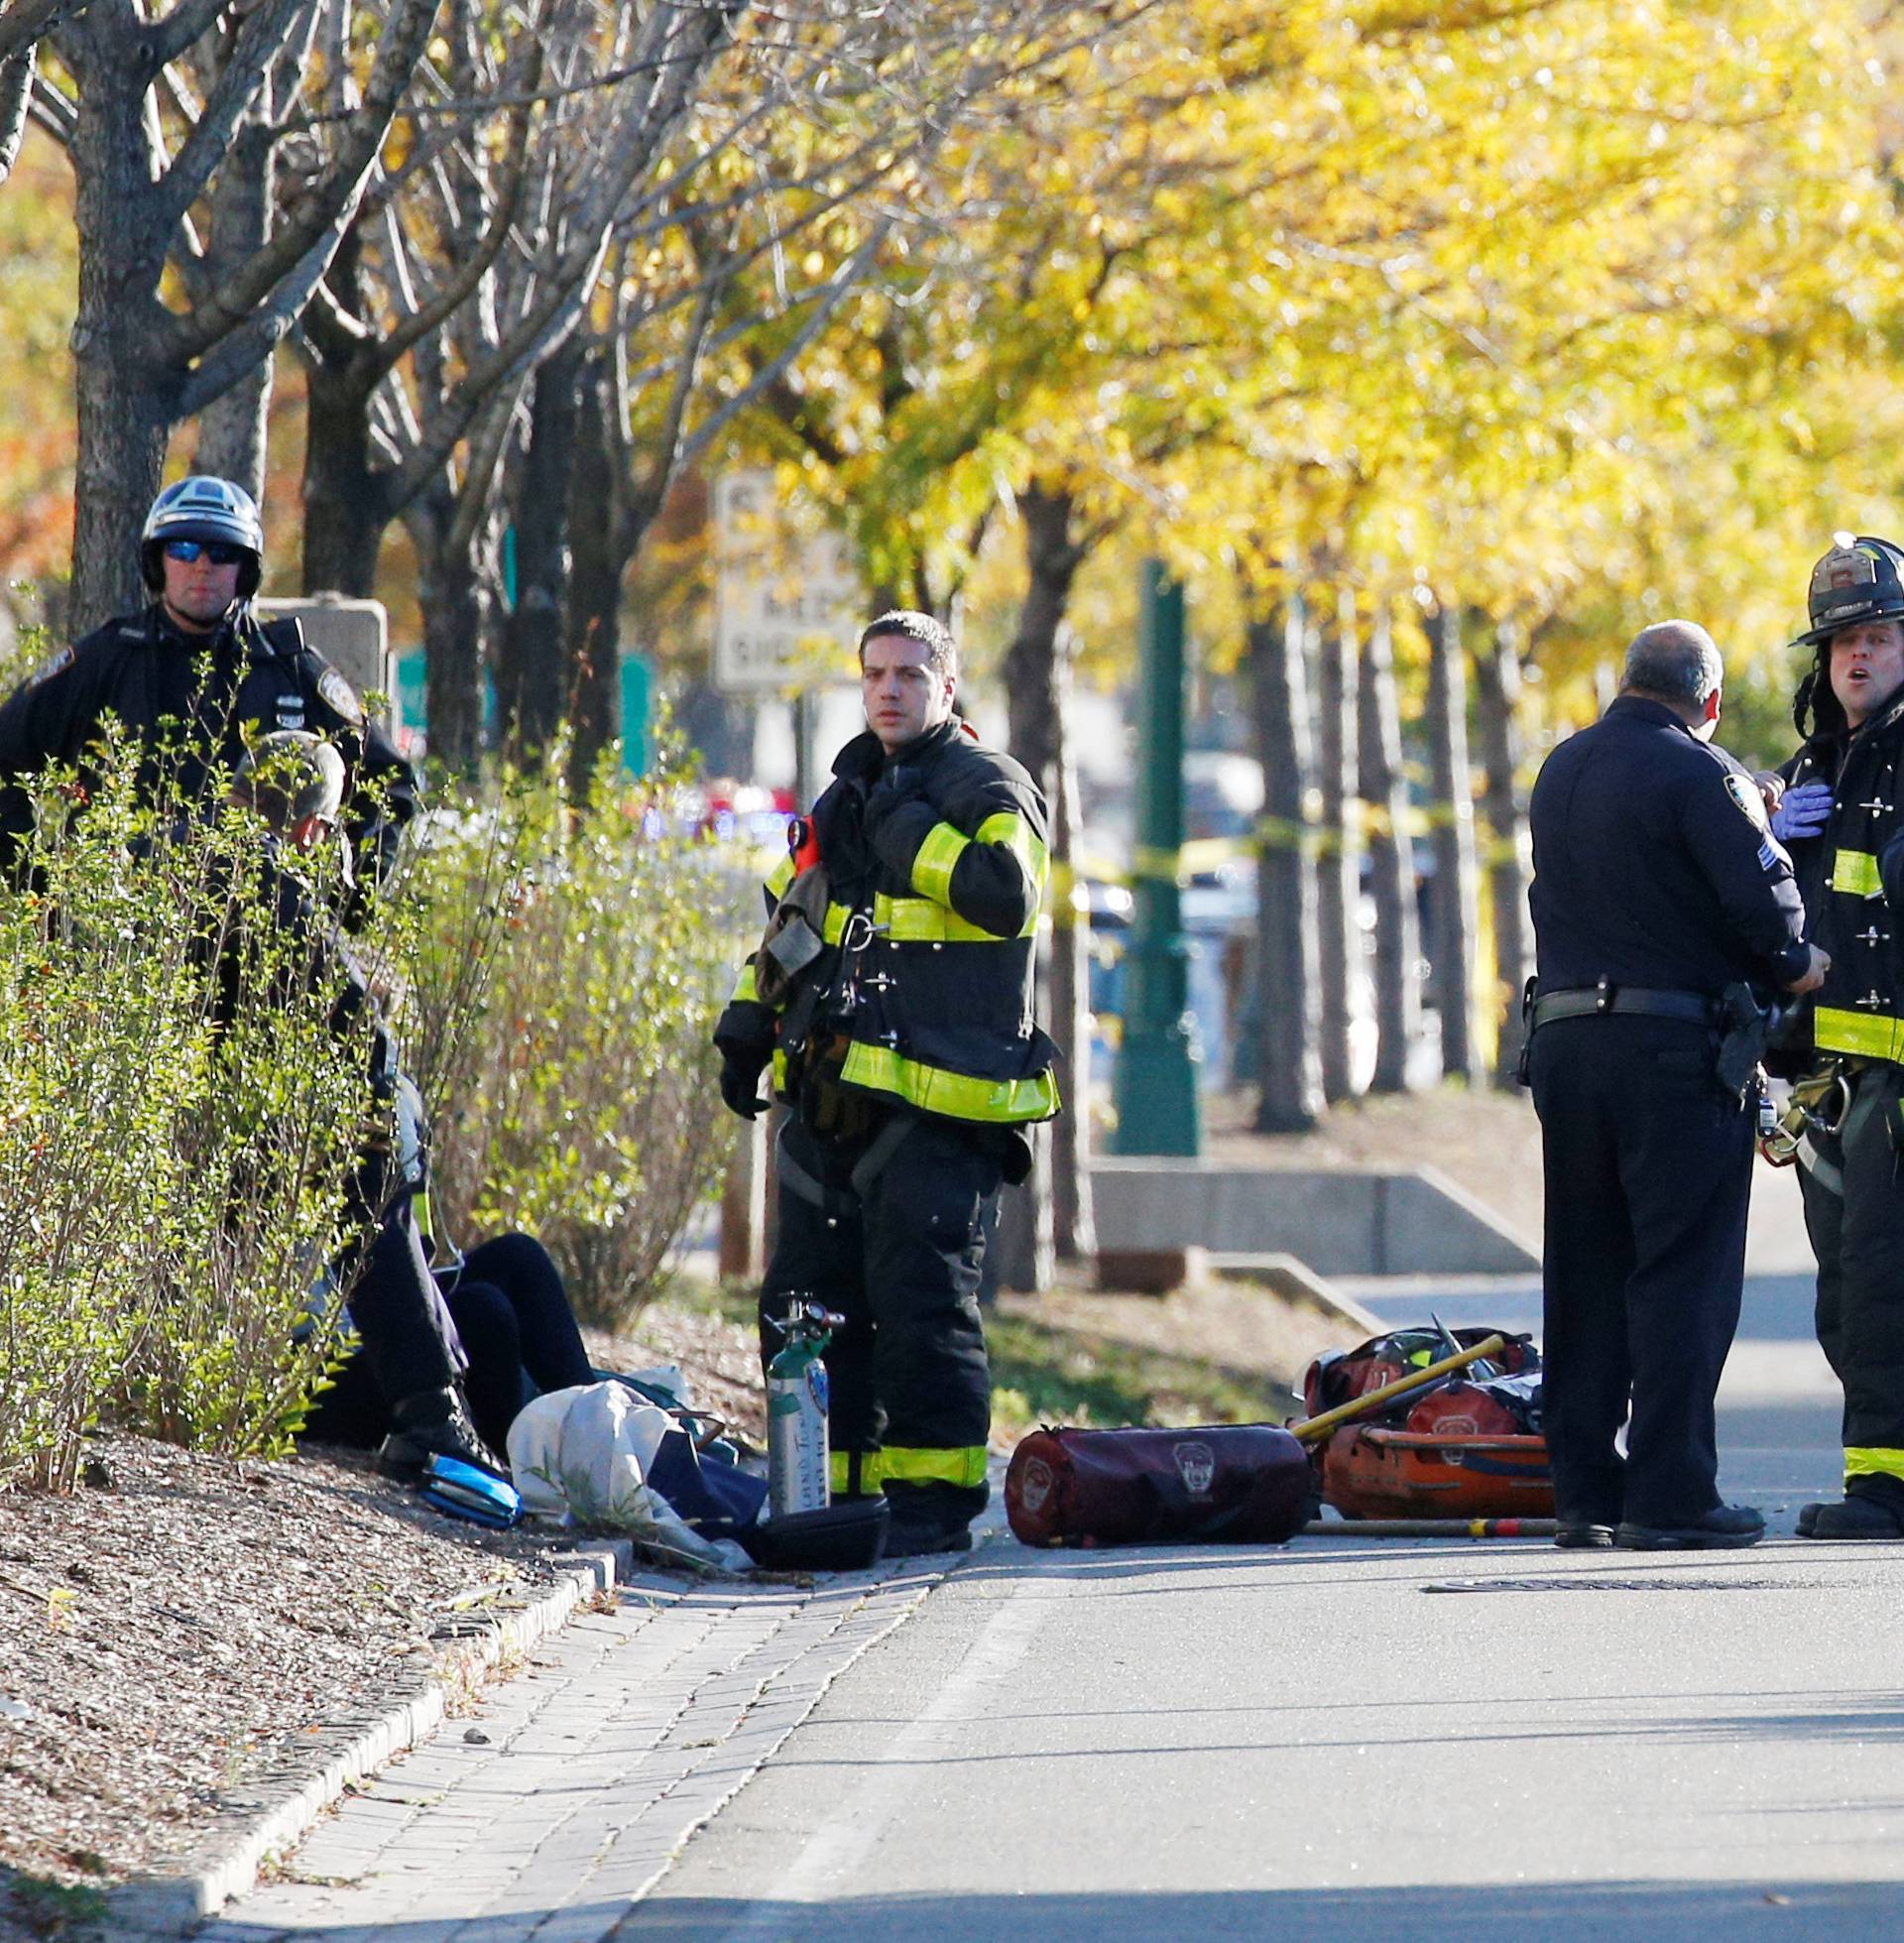 New York city first responders stand at the crime scene on a bike path in lower Manhattan in New York